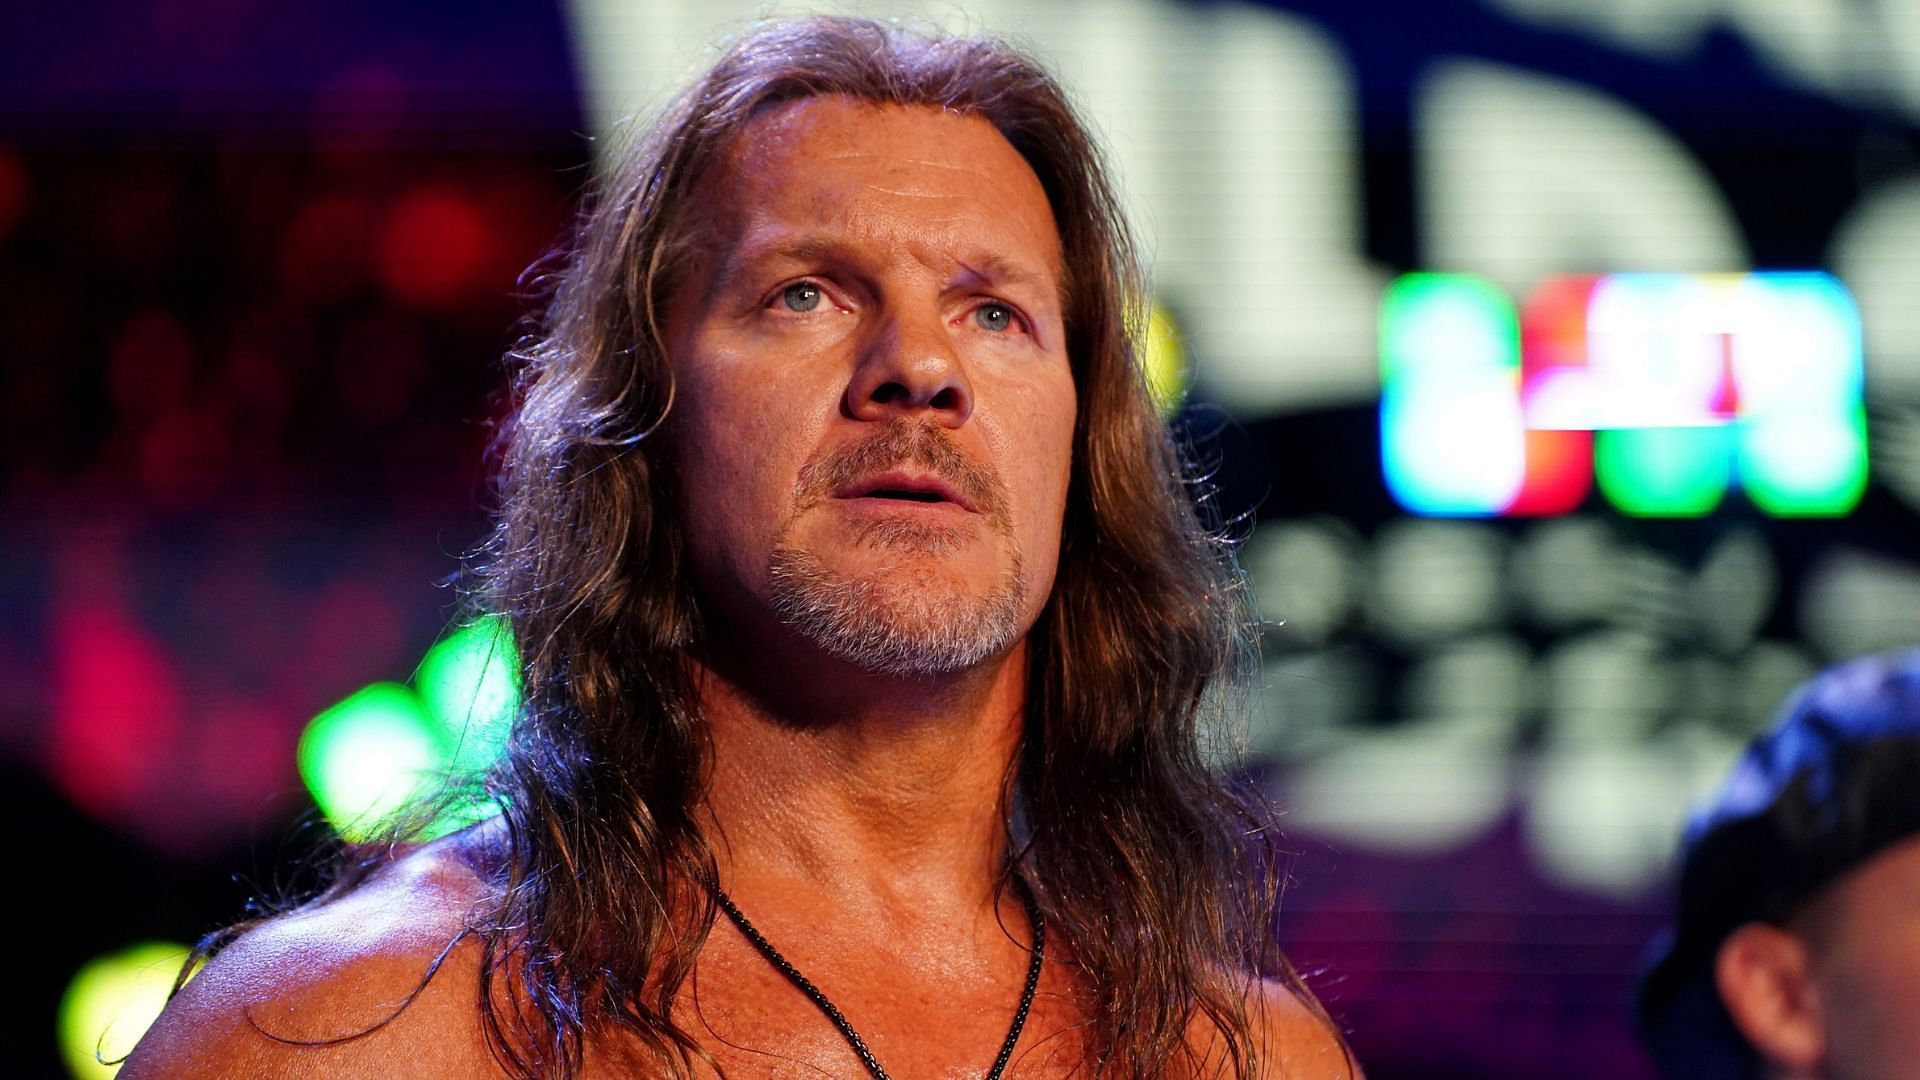 Will Chris Jericho go down as a legend of pro wrestling?